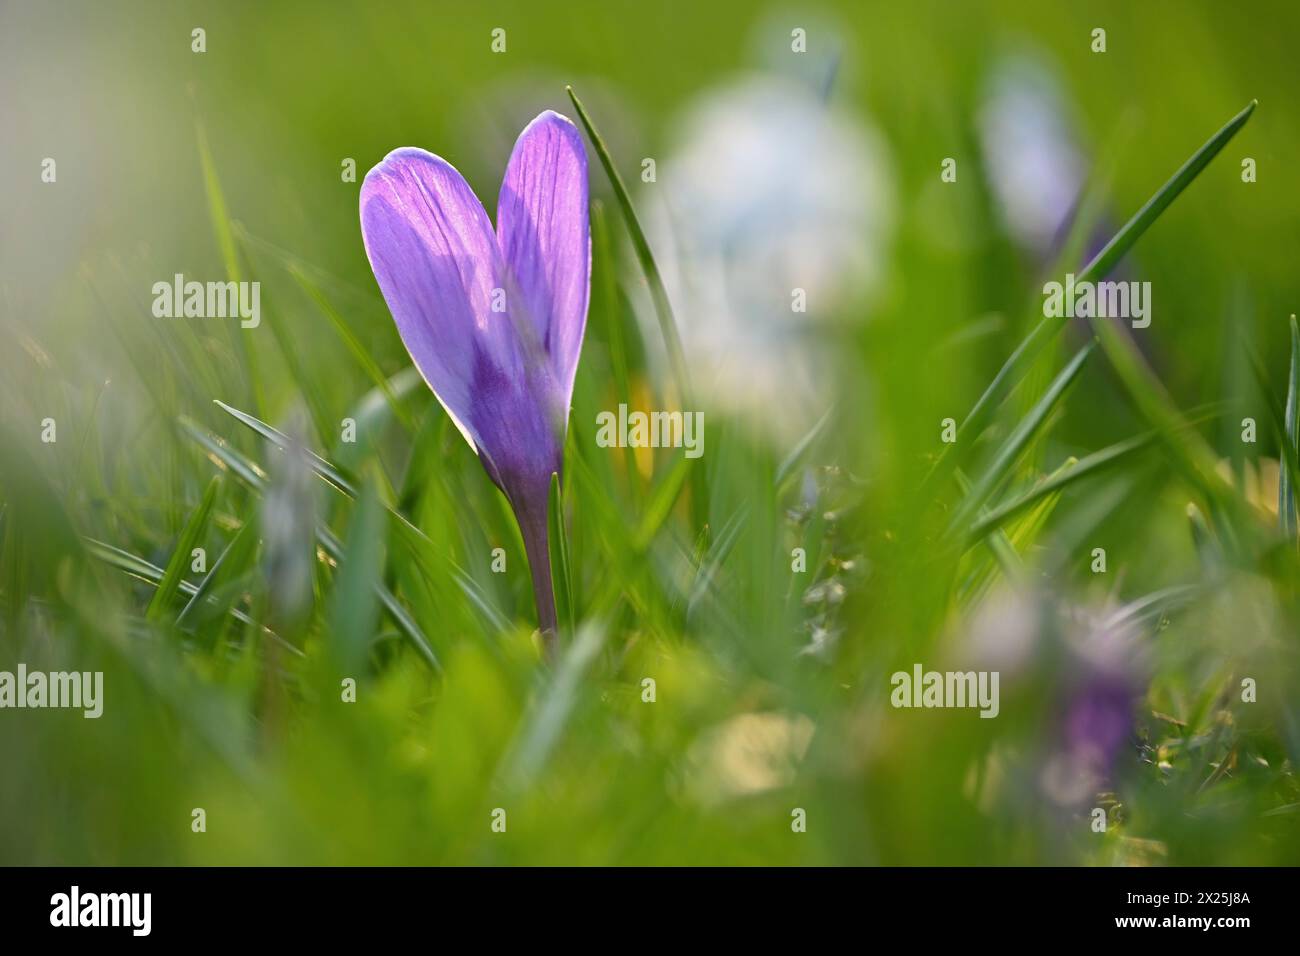 Spring background with flowers. Nature and delicate photo with details of blooming colorful crocuses in spring time.(Crocus vernus) Stock Photo